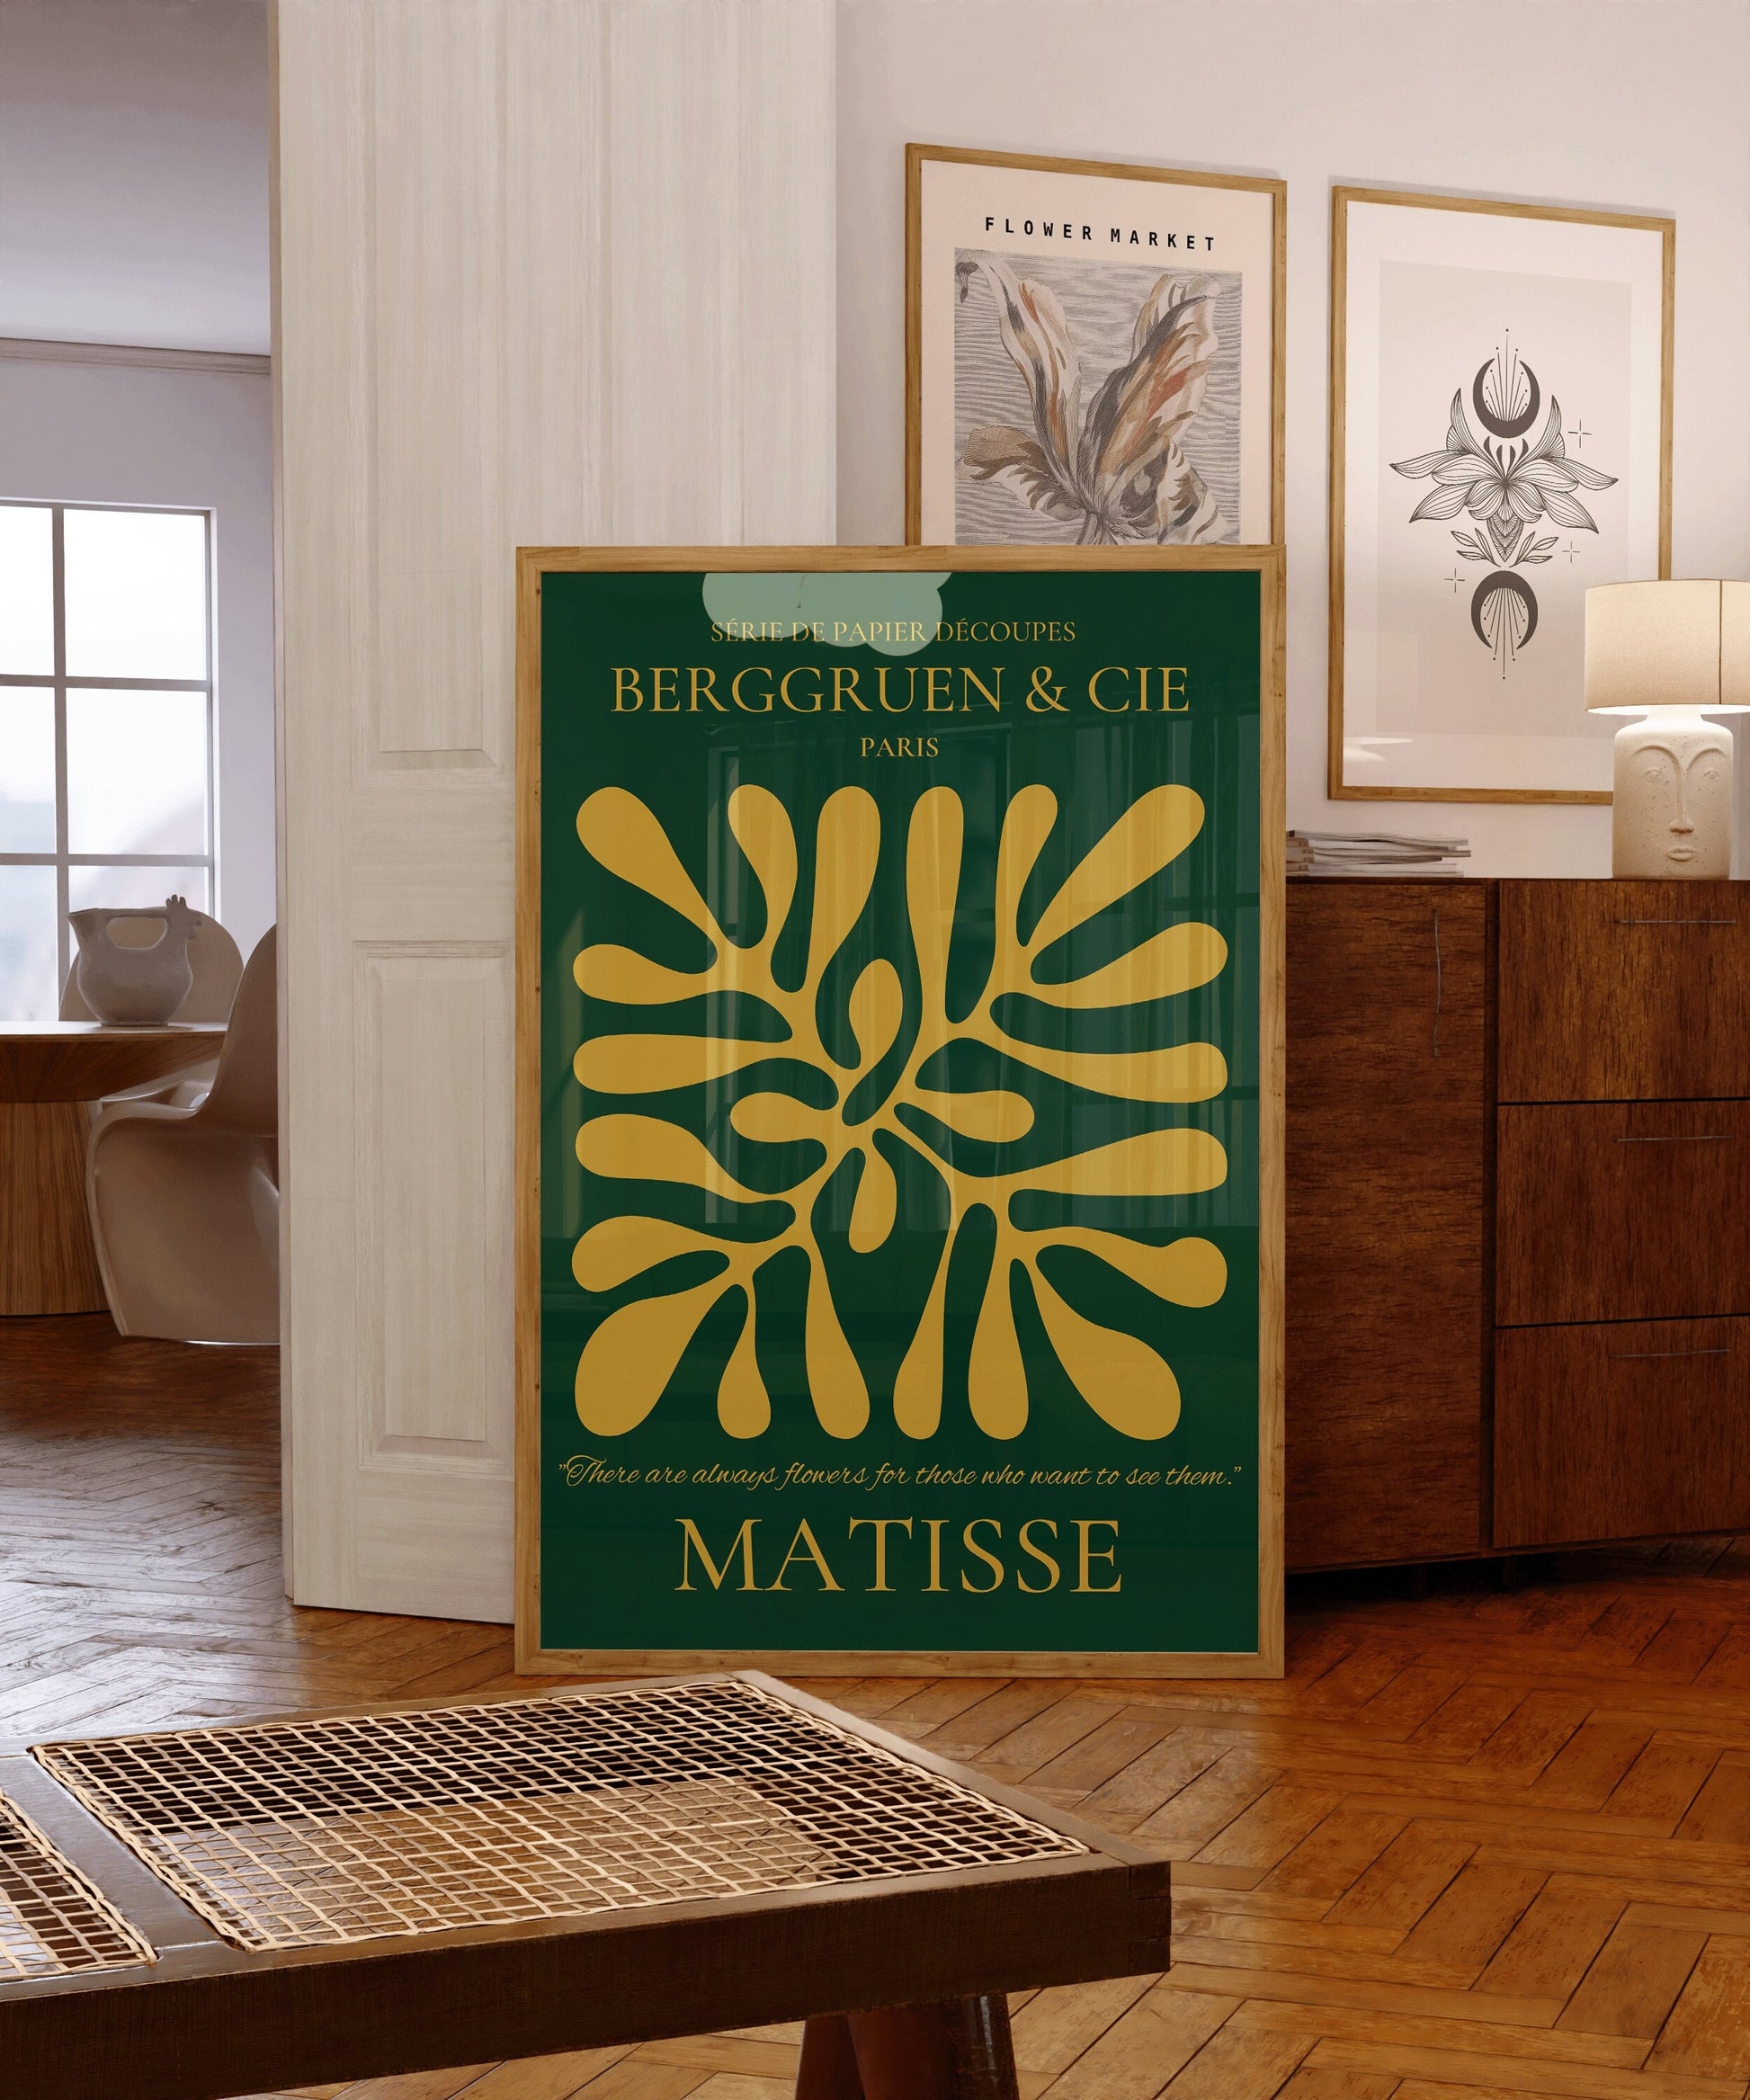 Henri Matisse Forest Green Gold Emerald Leaf Poster Papier Decoupes Exhibition Museum Abstract Art Mid Century Modern Ready to hang Decor